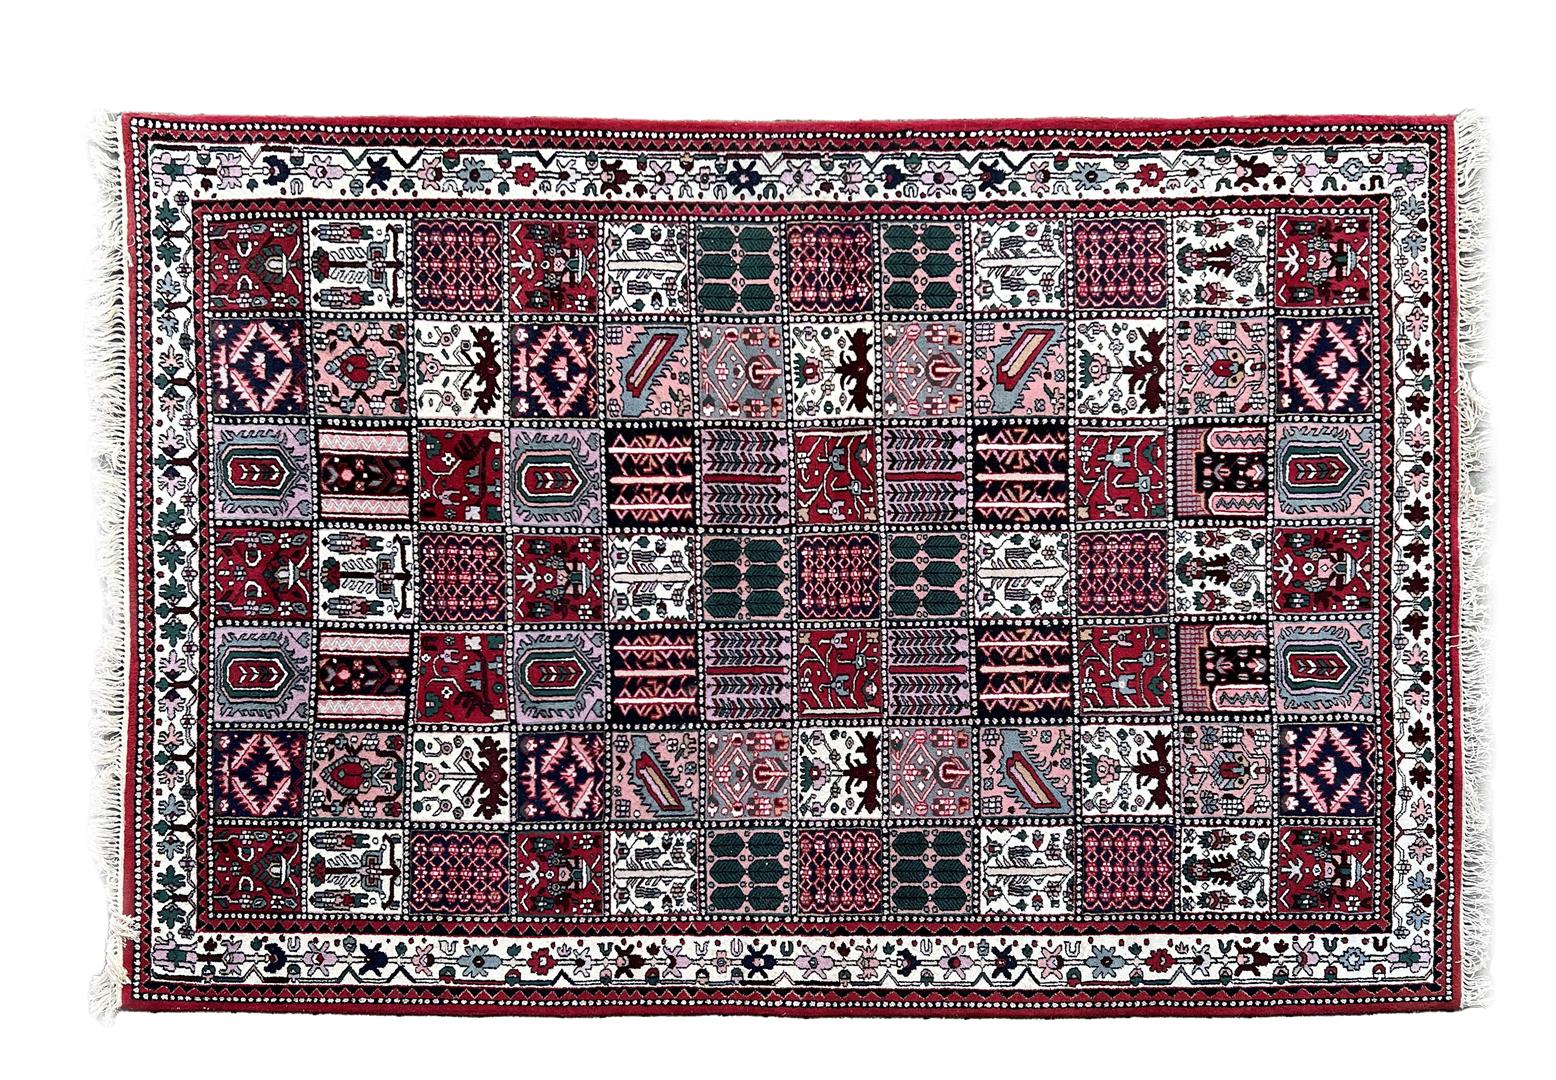 Hand-knotted wool carpet, Bachtiari